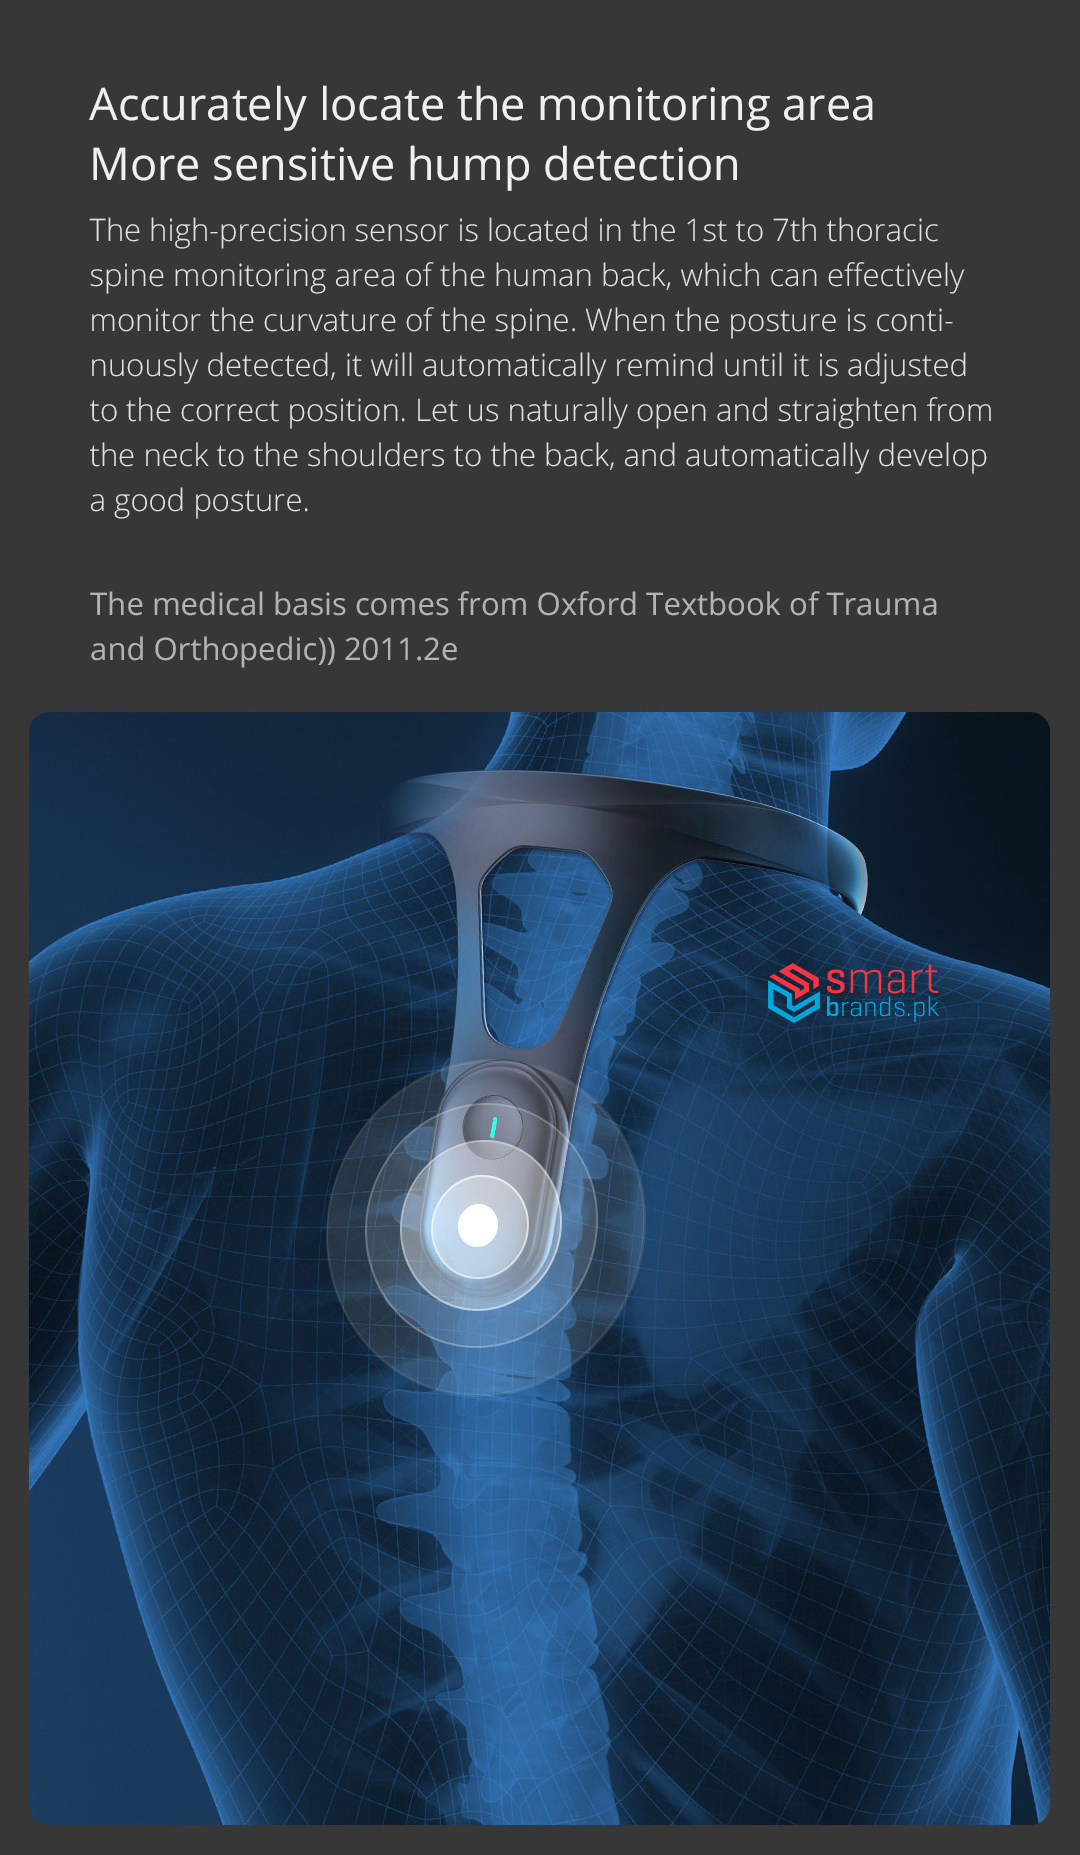 The high-precision sensor is located in the 1st to 7th thoracic spine monitoring area of the human back, which can effectively monitor the curvature of the spine. When the posture is continuously detected, it will automatically remind until it is adjusted to the correct position. Let us naturally open and straighten from the neck to the shoulders to the back, and automatically develop a good posture.